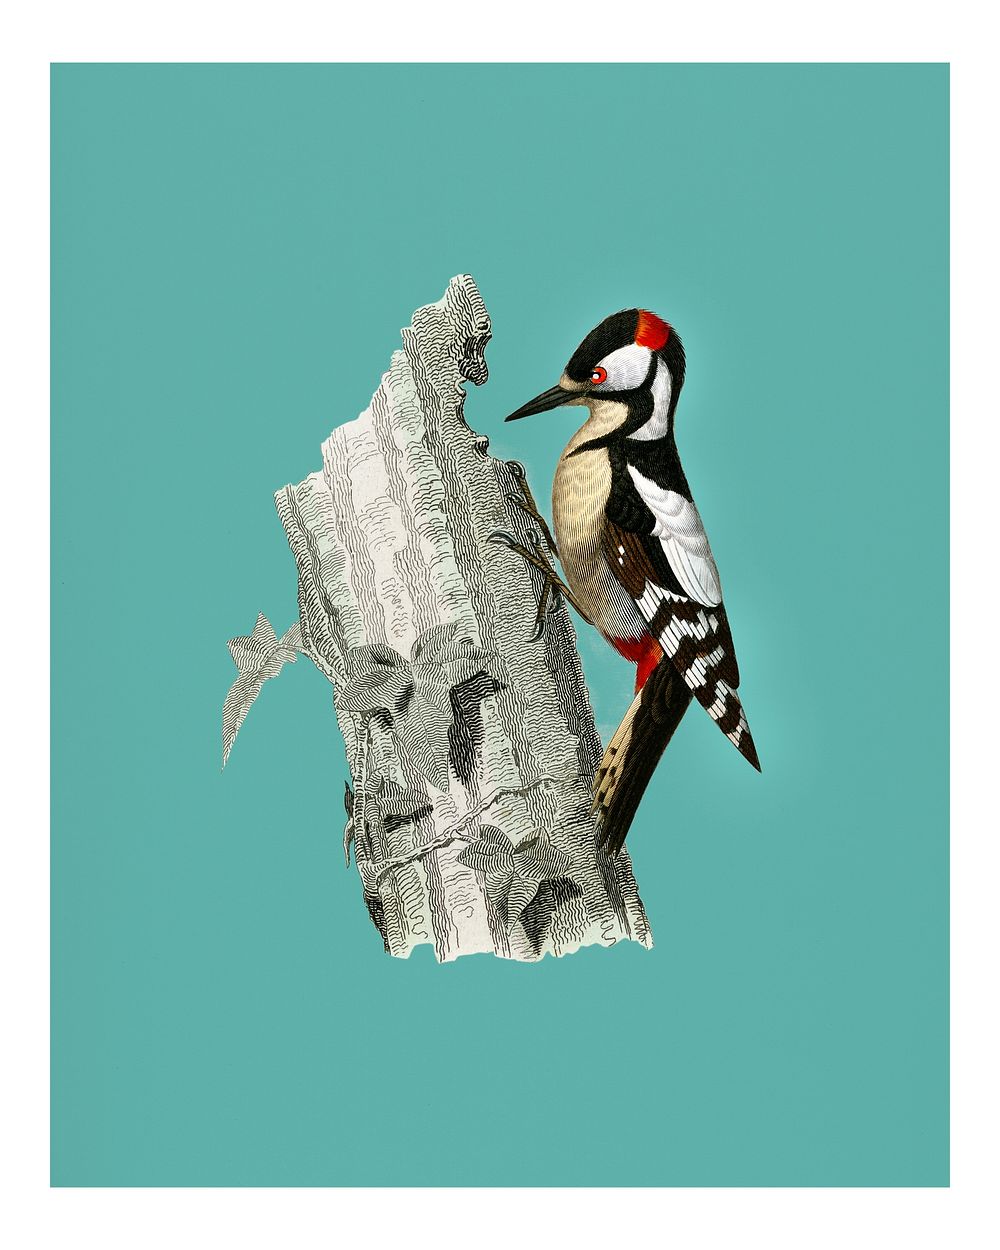 Vintage great spotted woodpecker (Picus major) illustration wall art print and poster.